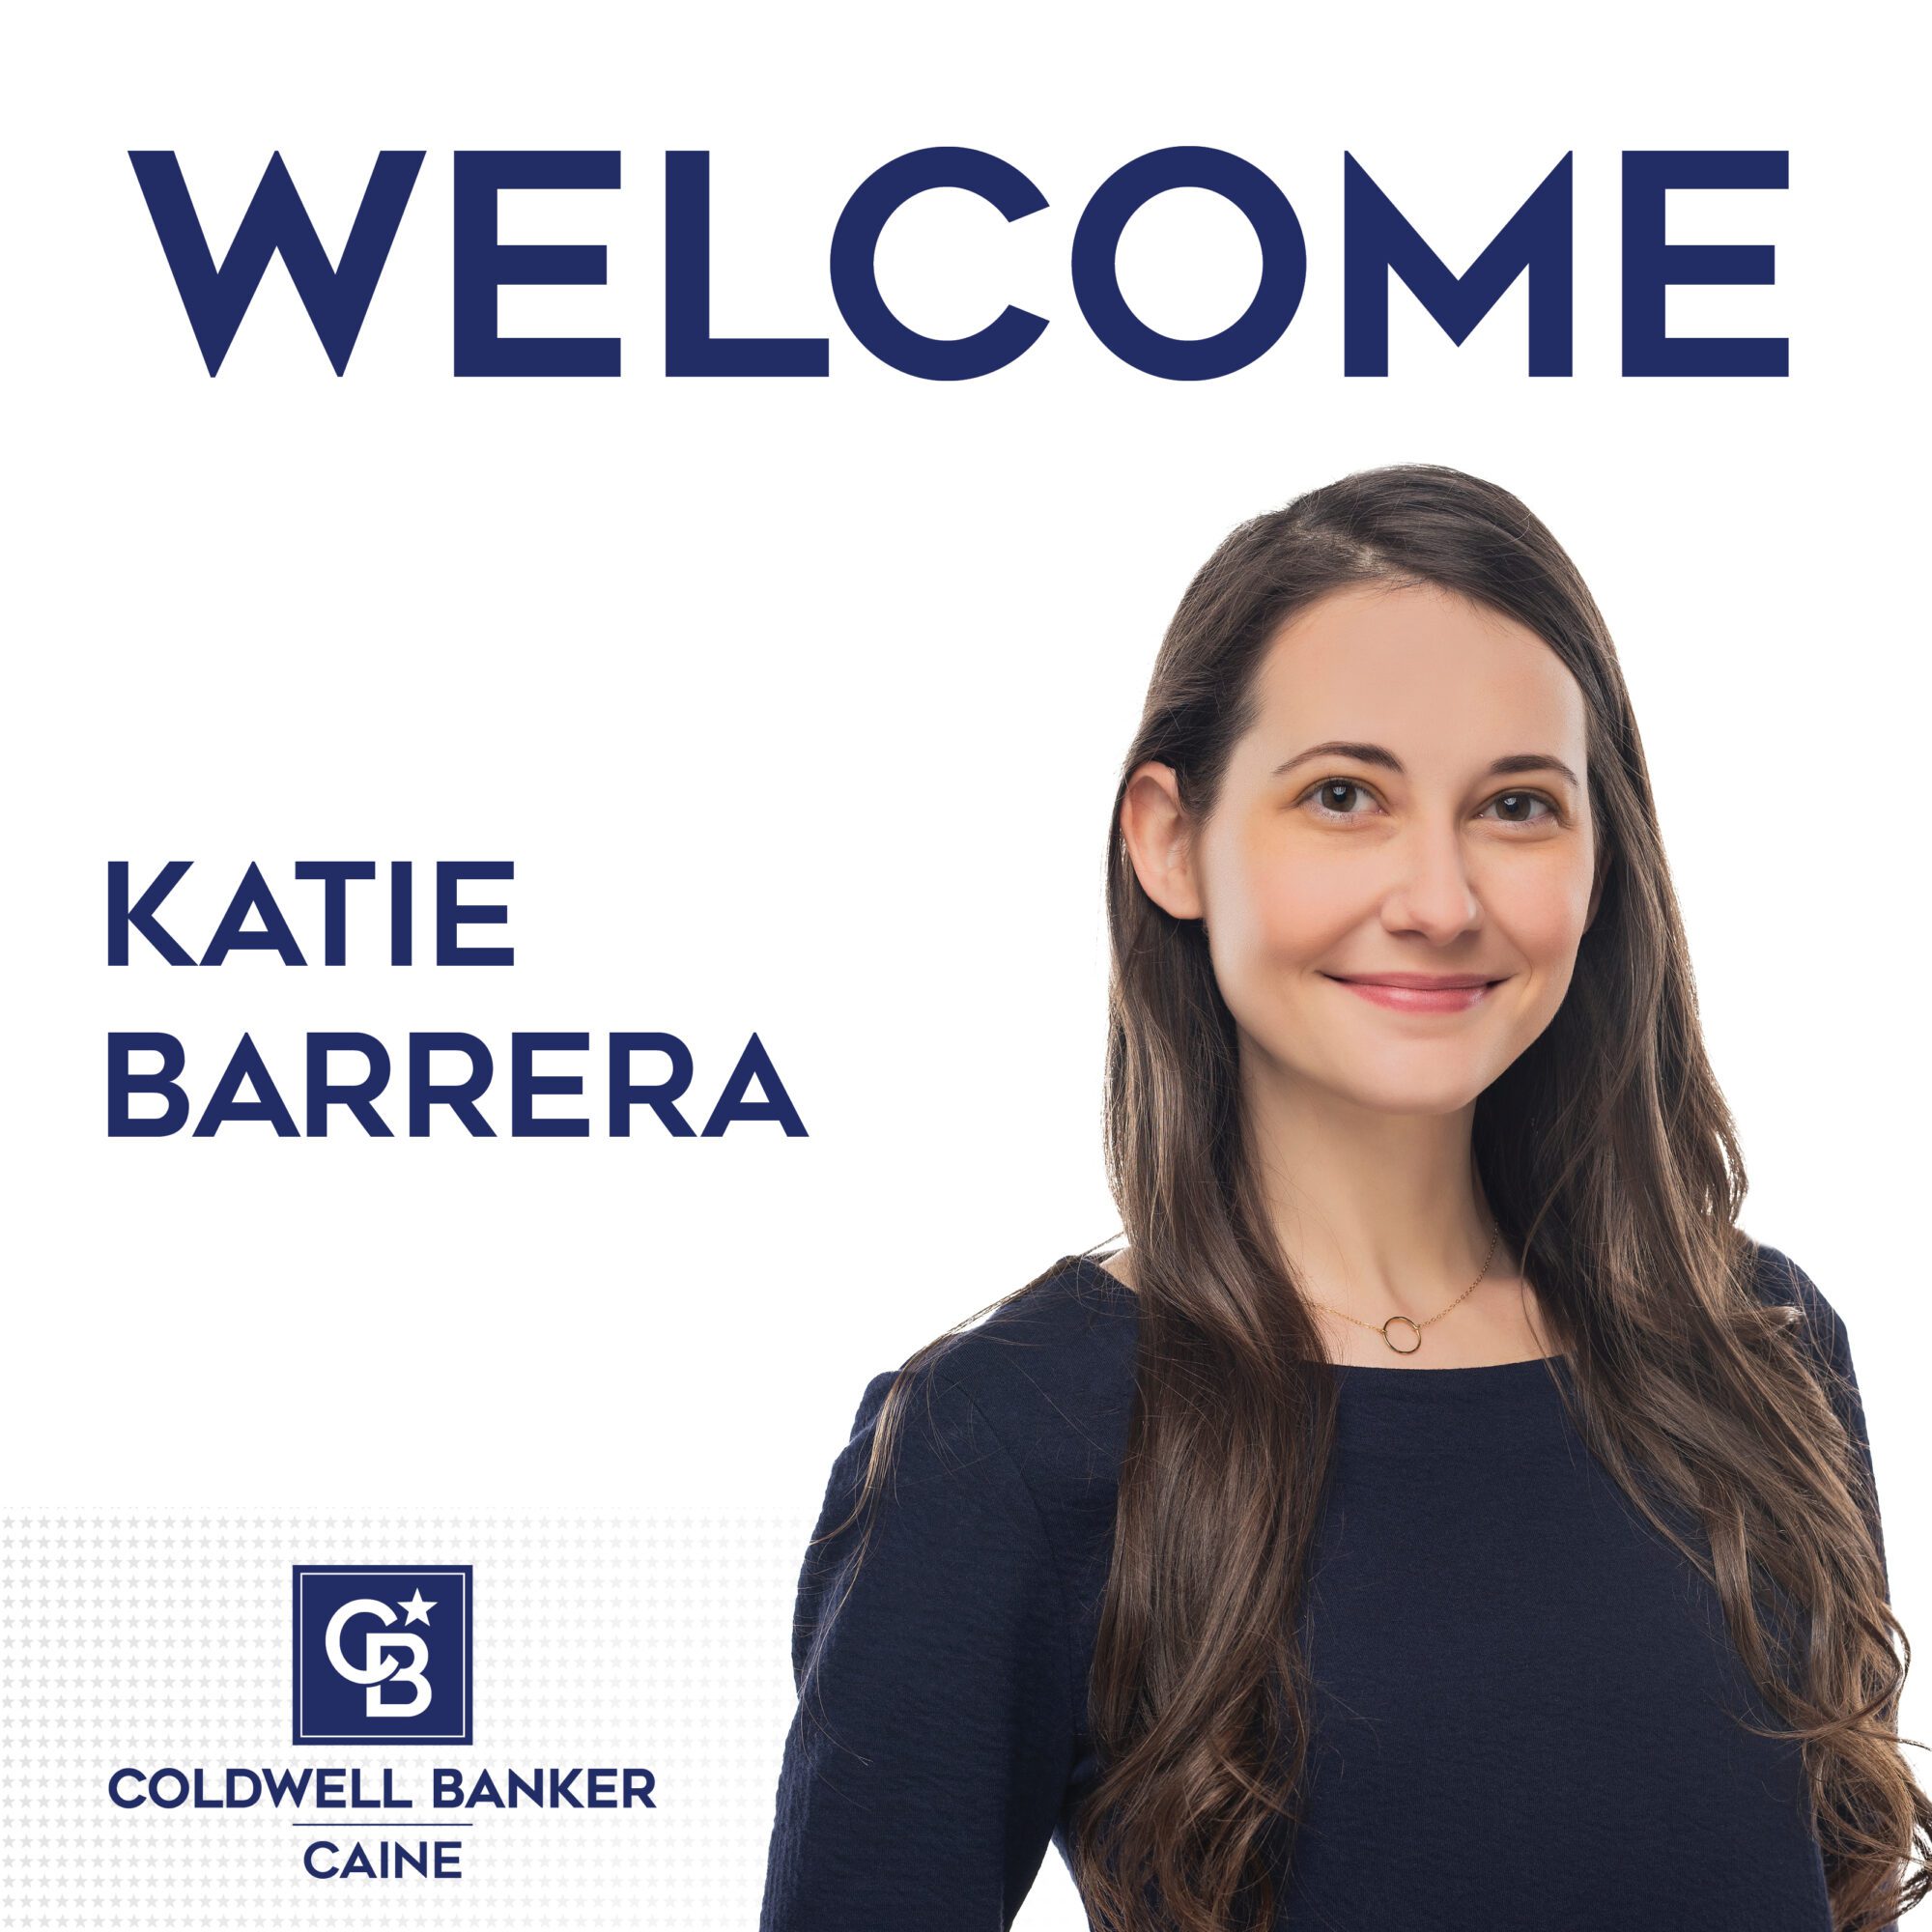 Katie Barrera Joins Coldwell Banker Caine in Greenville